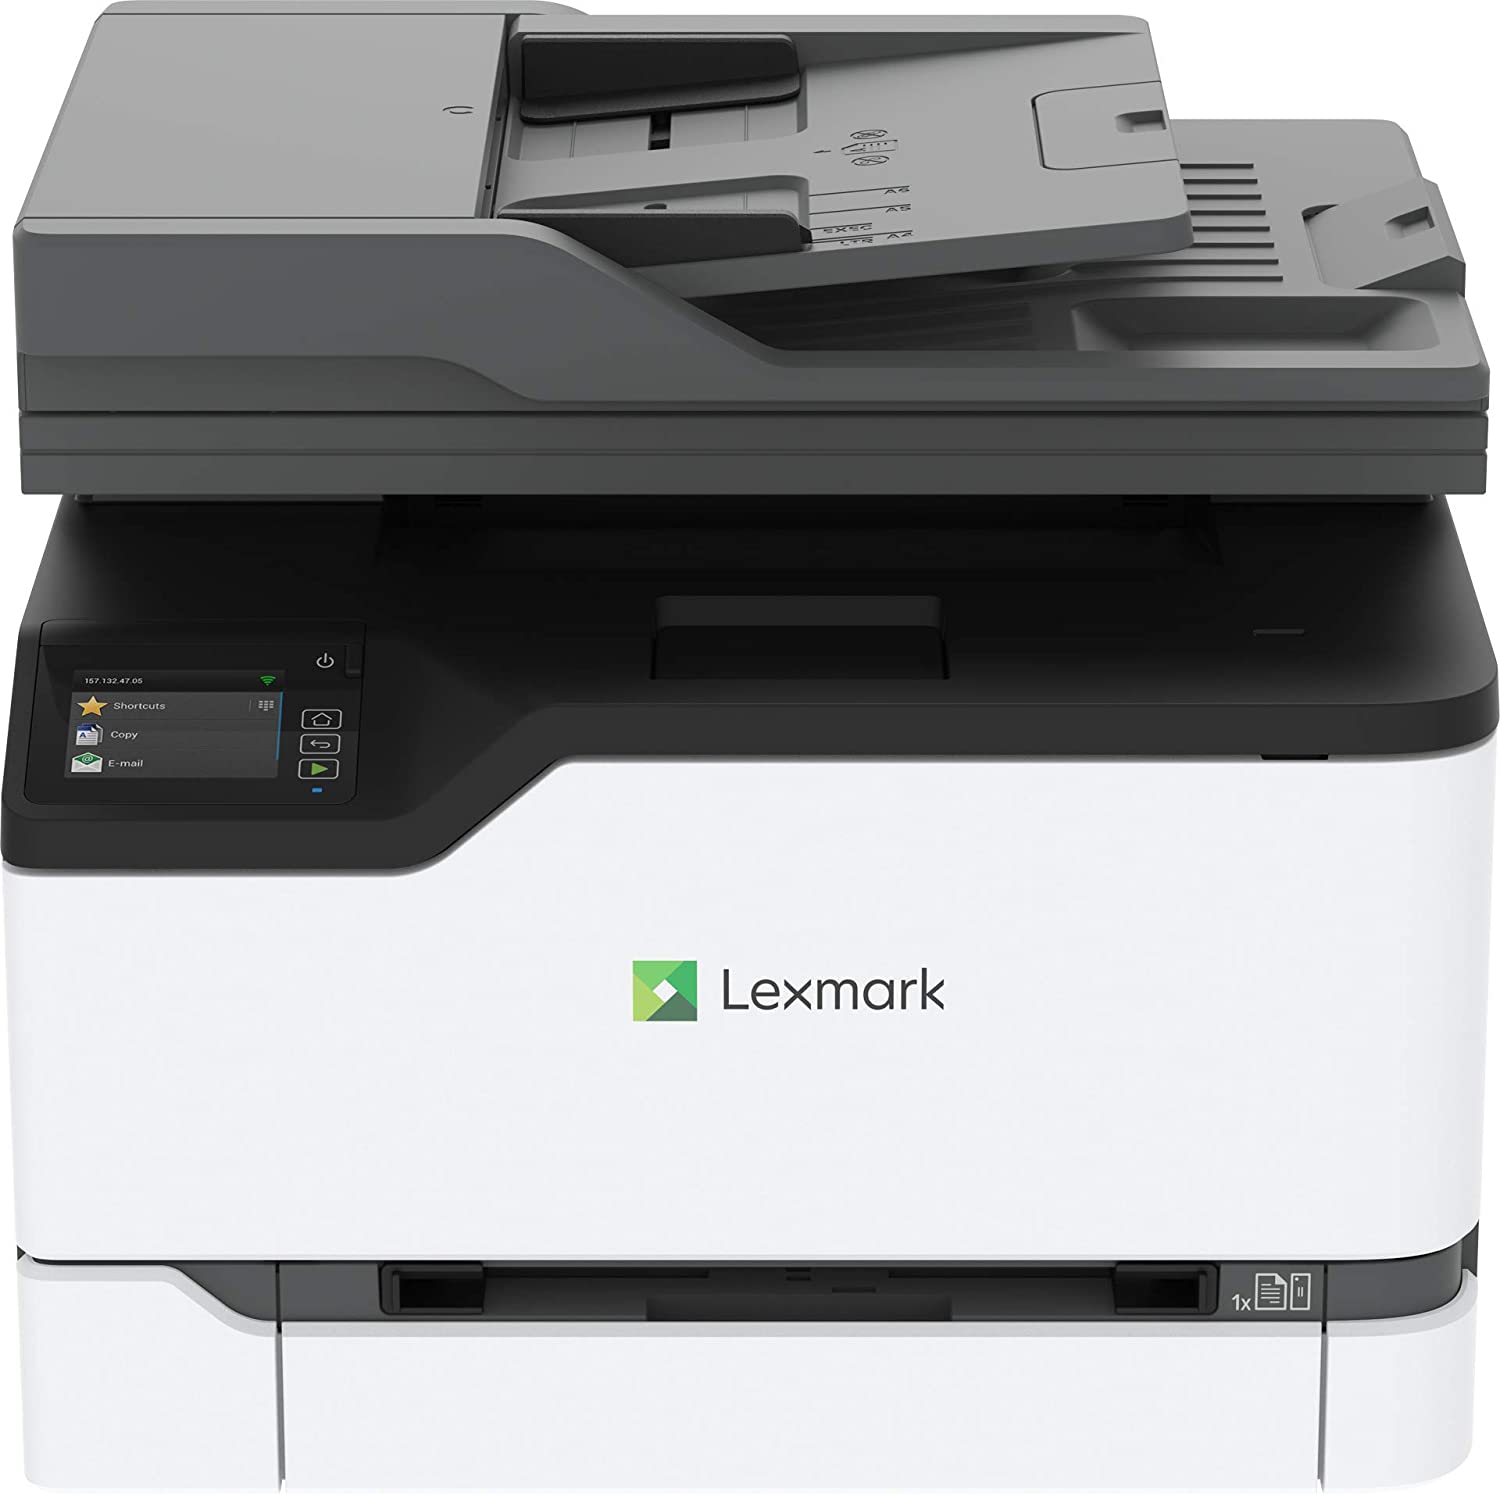 Lexmark MC3426adw Color Laser Multifunction Product with Print, Copy, Fax, Scan and Wireless Capabilities, Plus Full-Spectrum Security and Print Speed up to 26 ppm (40N9360), White, Small